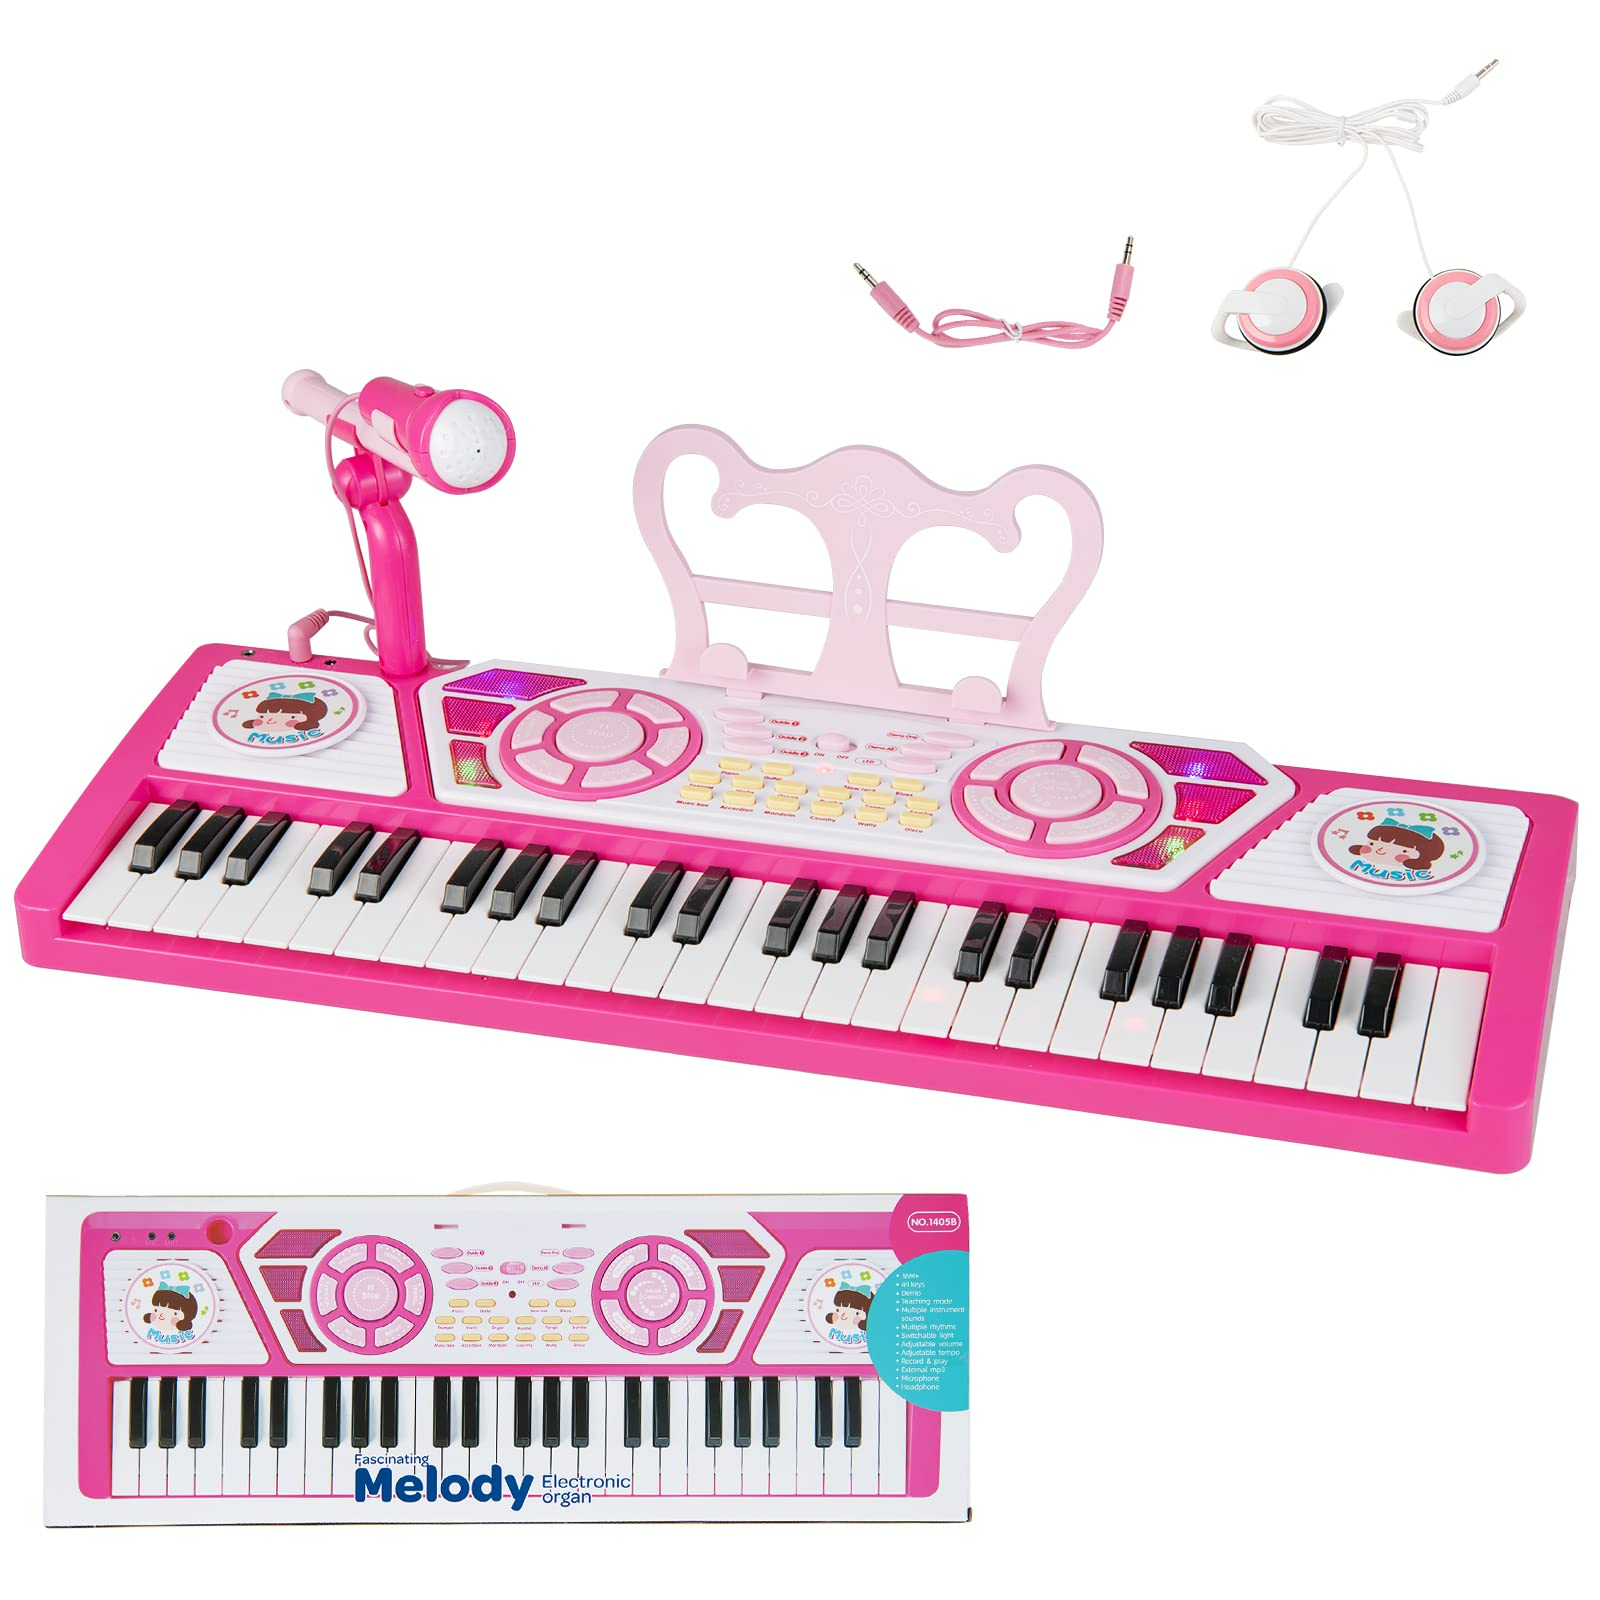 OLAKIDS 49 Keys Kids Piano Keyboard with Microphone, Portable Electronic Musical Instrument Toy - OLAKIDS